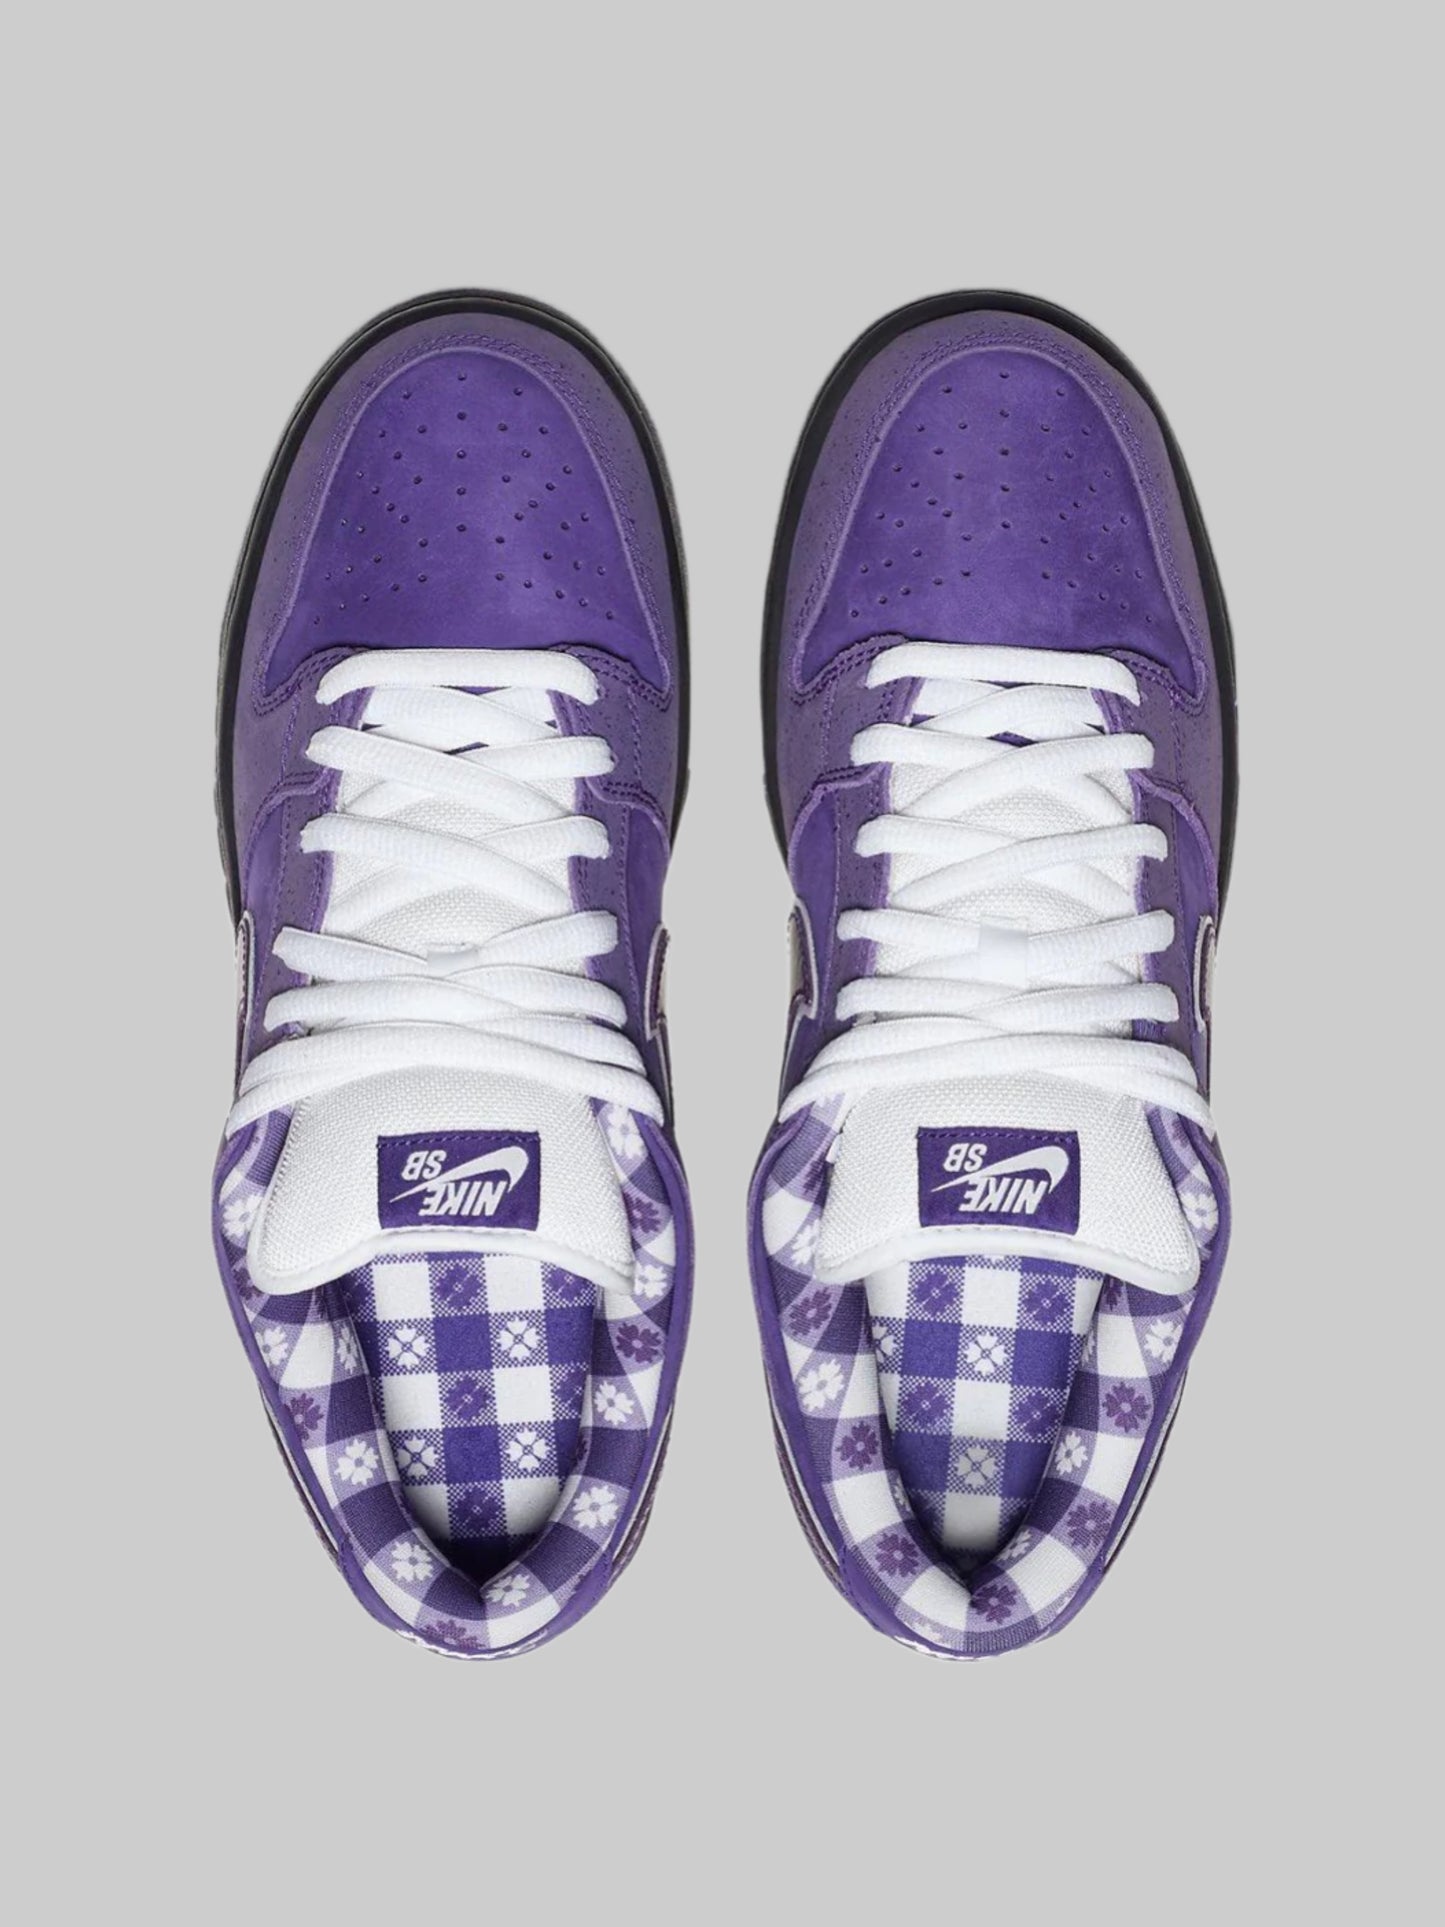 Nike SB Dunk Low Concepts Lobster Purple